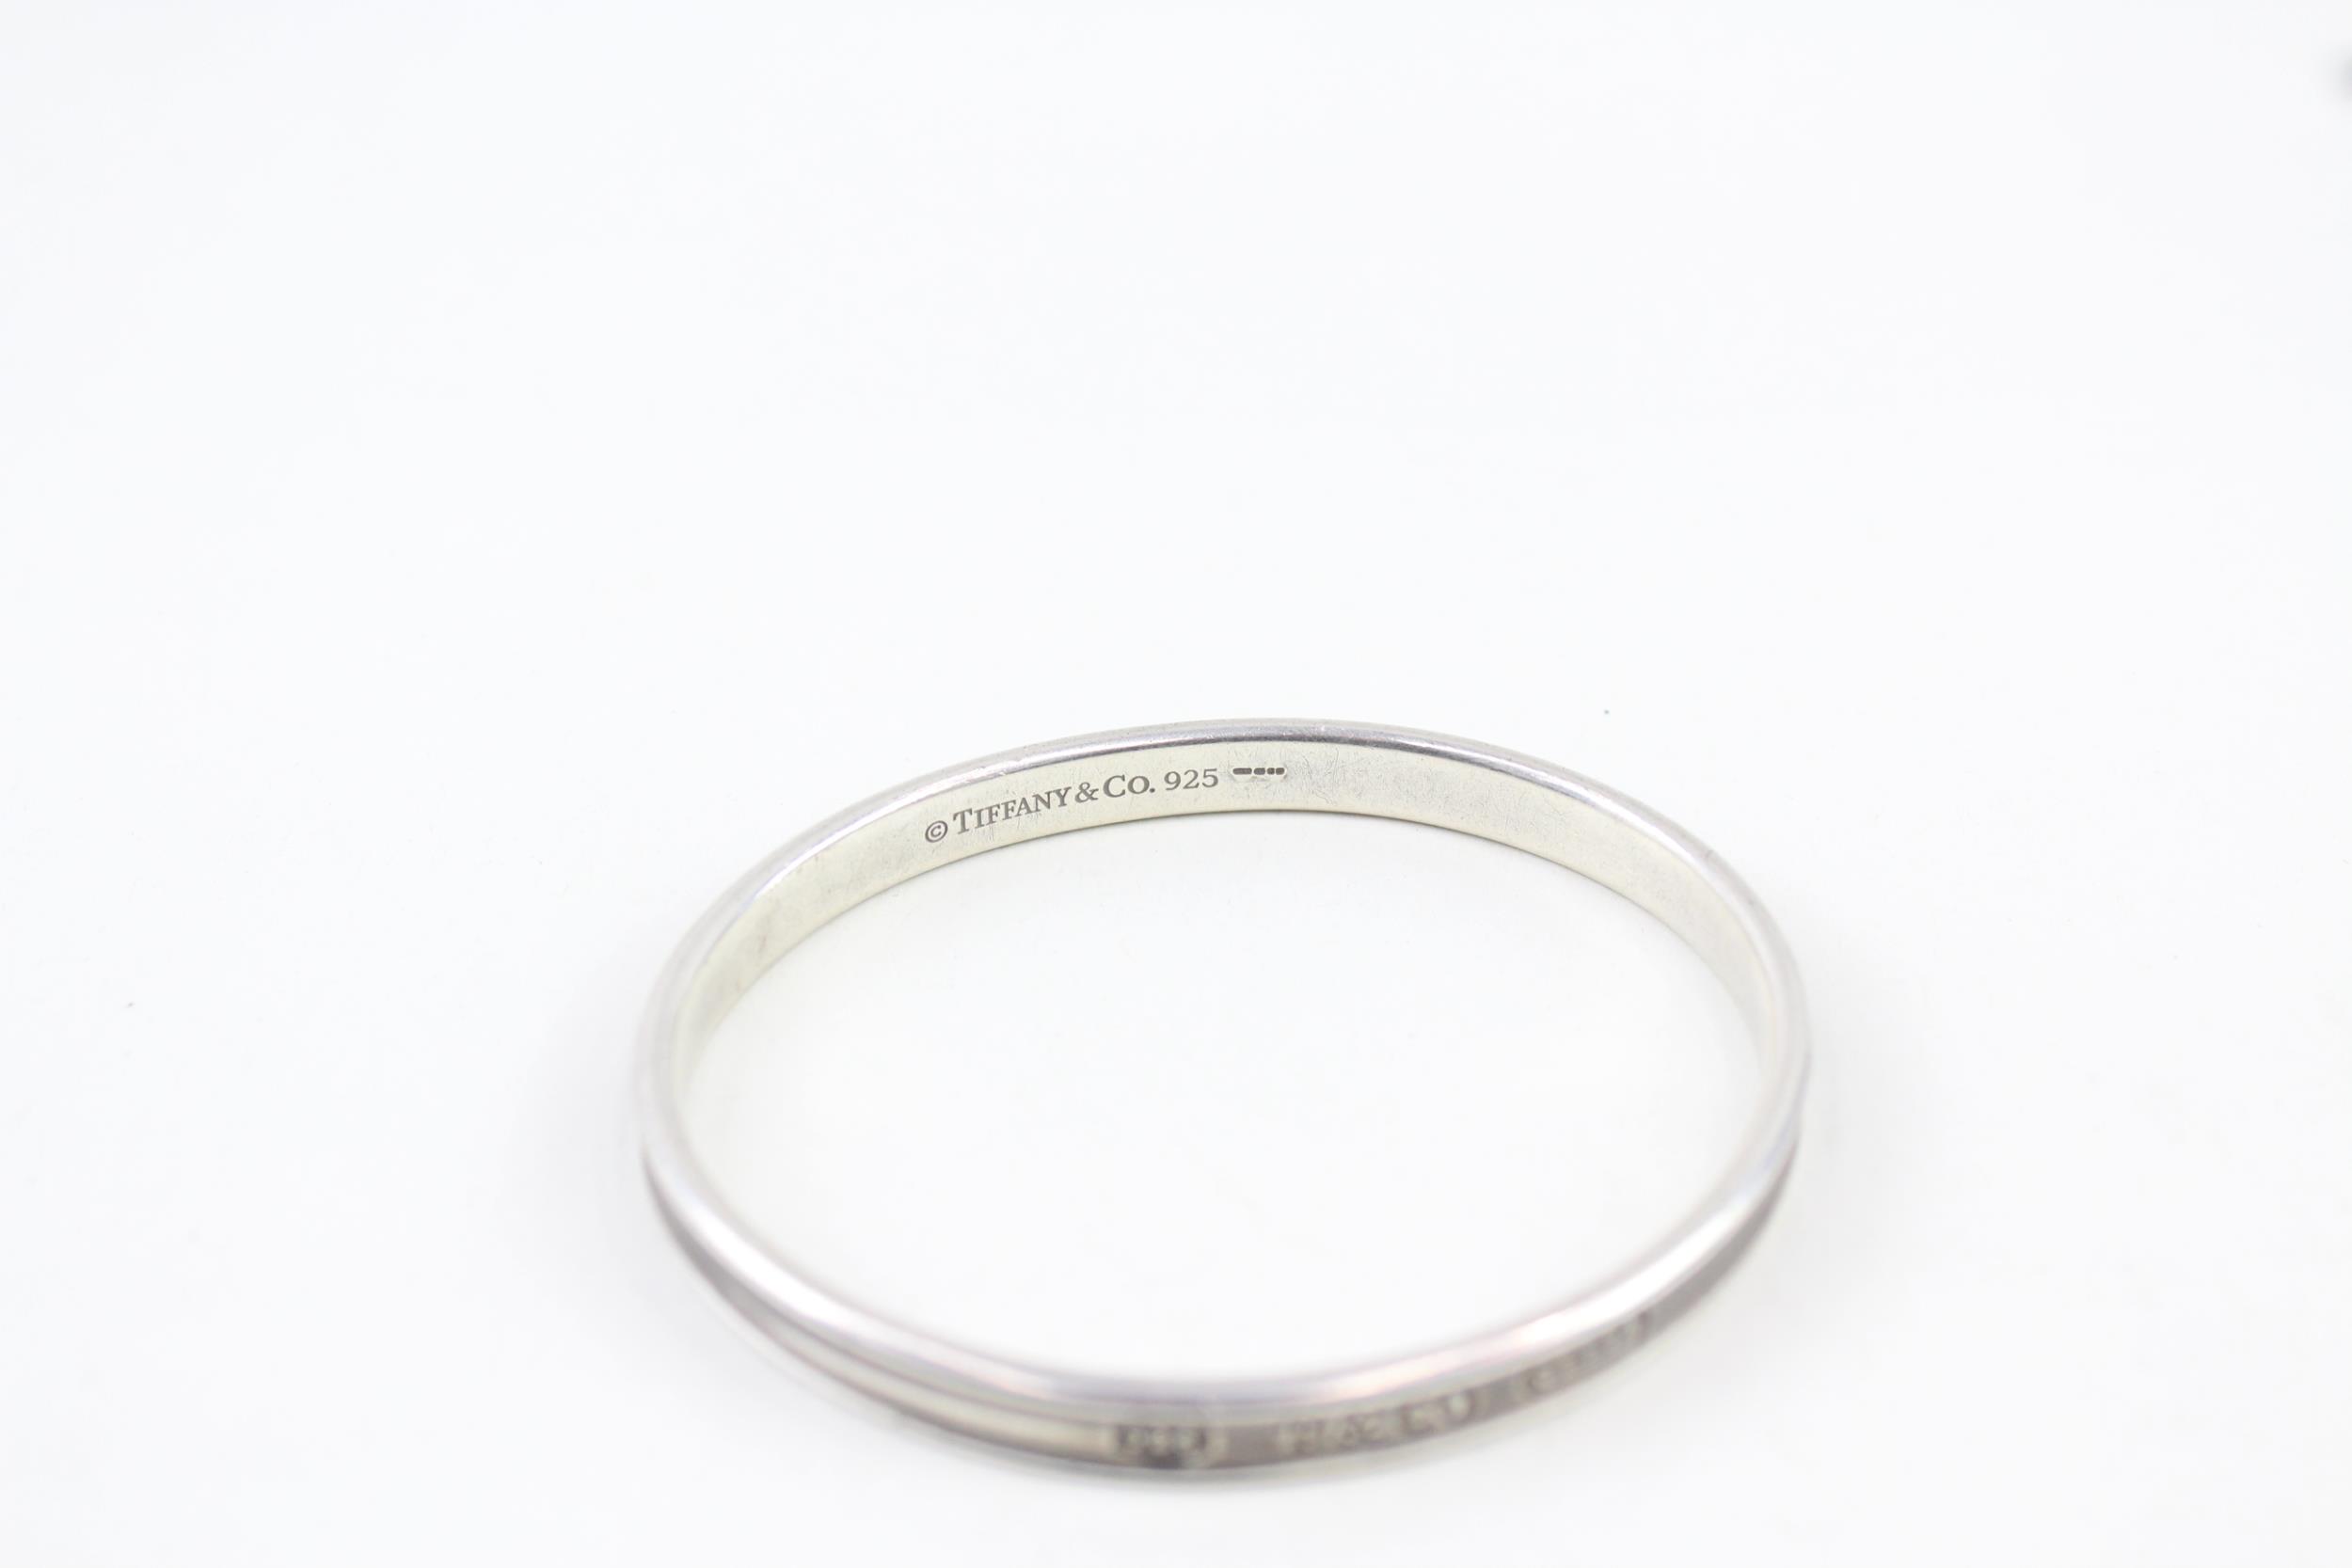 Silver bangle by designer Tiffany & Co (32g) - Image 7 of 12